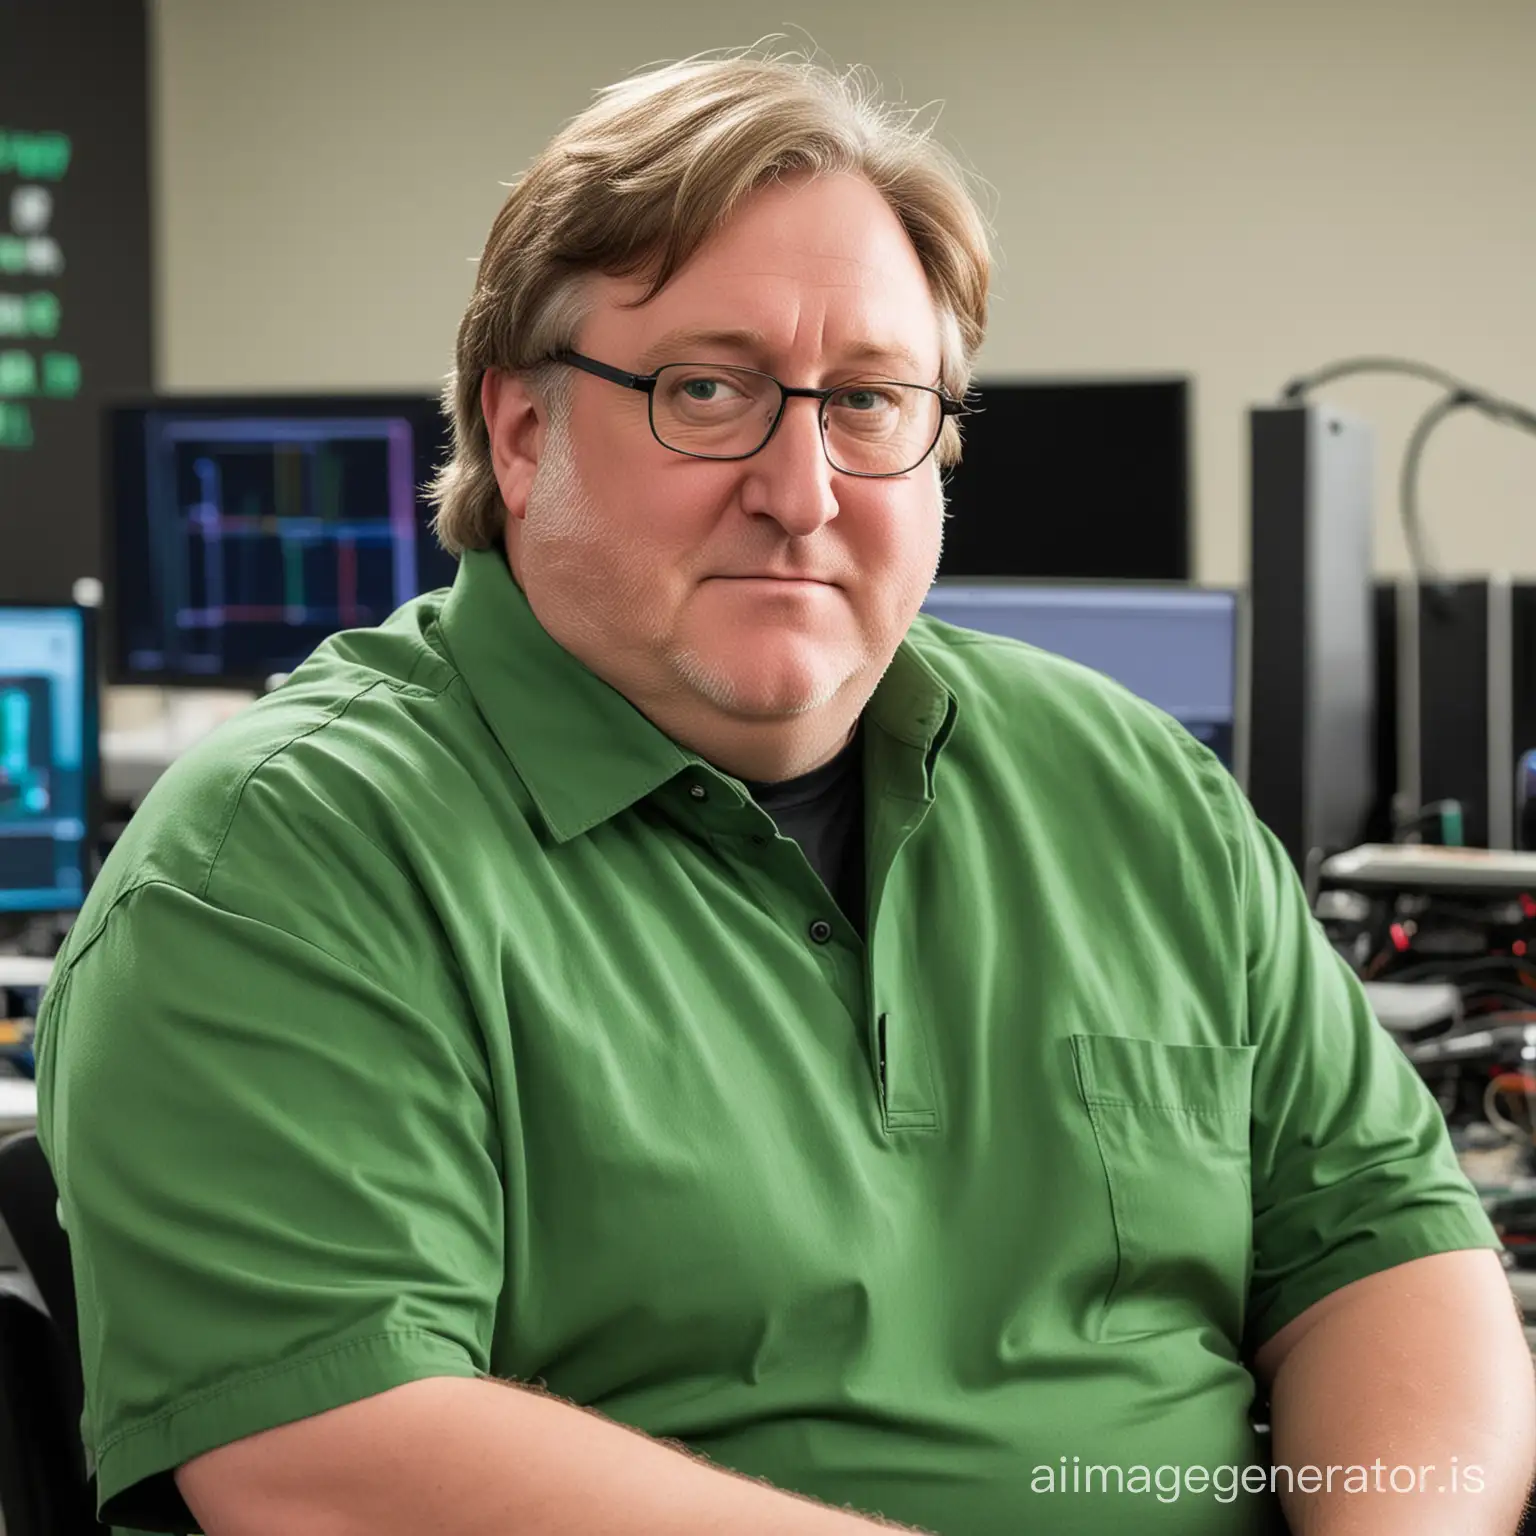 Gabe-Newell-Sitting-in-Front-of-Lab-Equipment-with-Slicked-Back-Hair